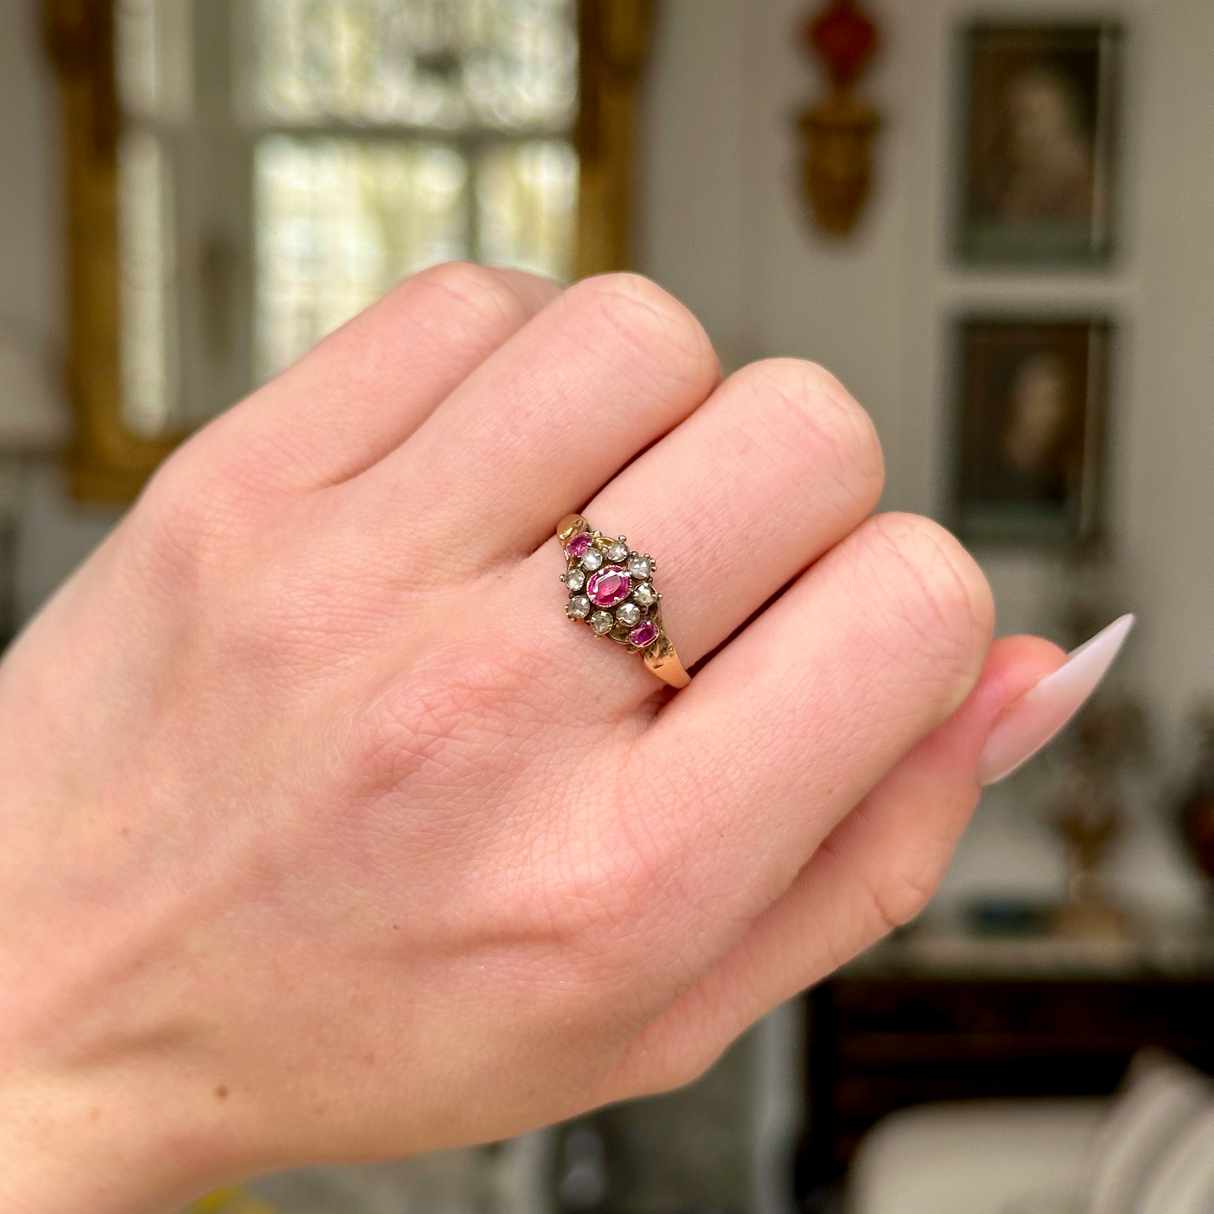 Antique, Edwardian Ruby and Diamond Cluster Ring, worn on closed hand.